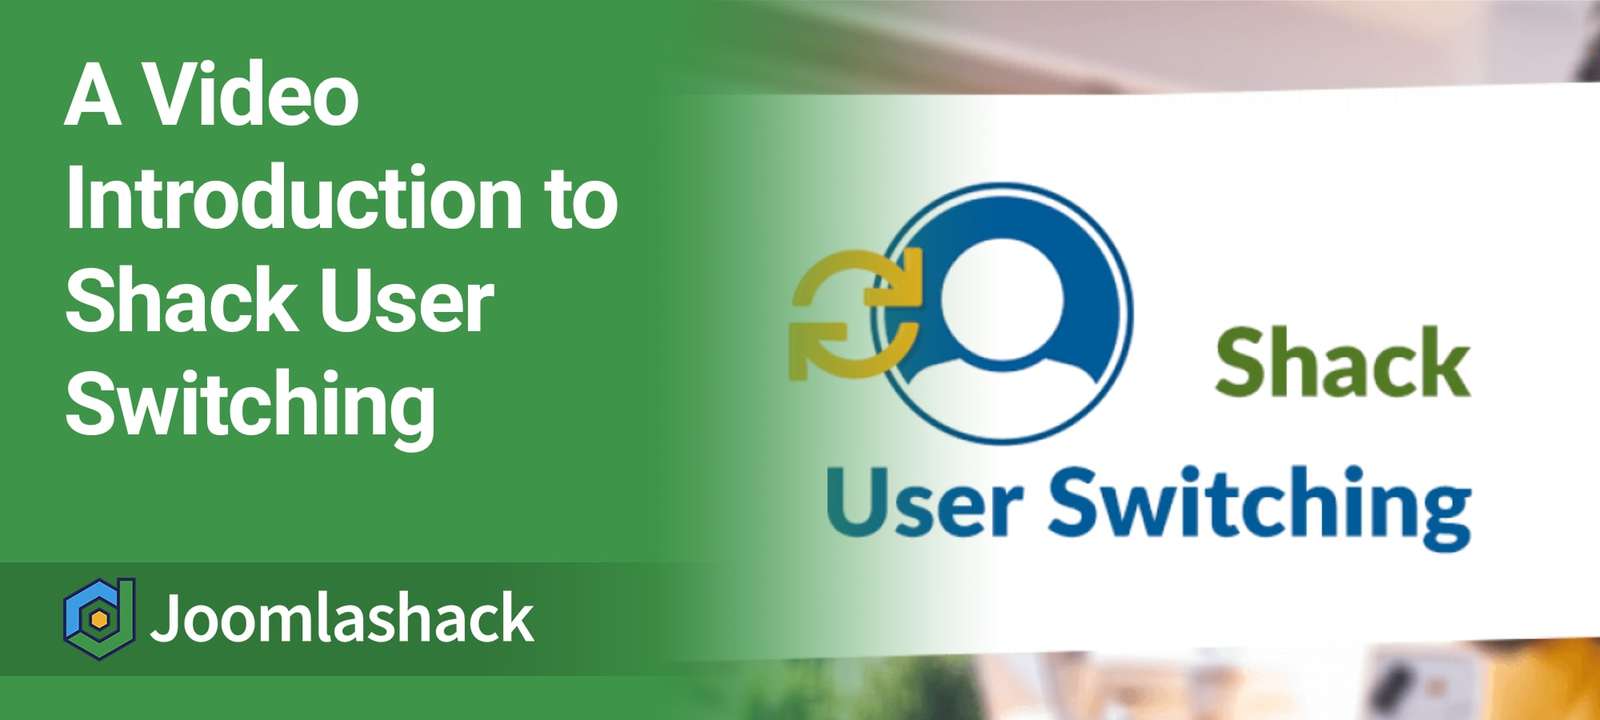 Video Introduction to Shack User Switching